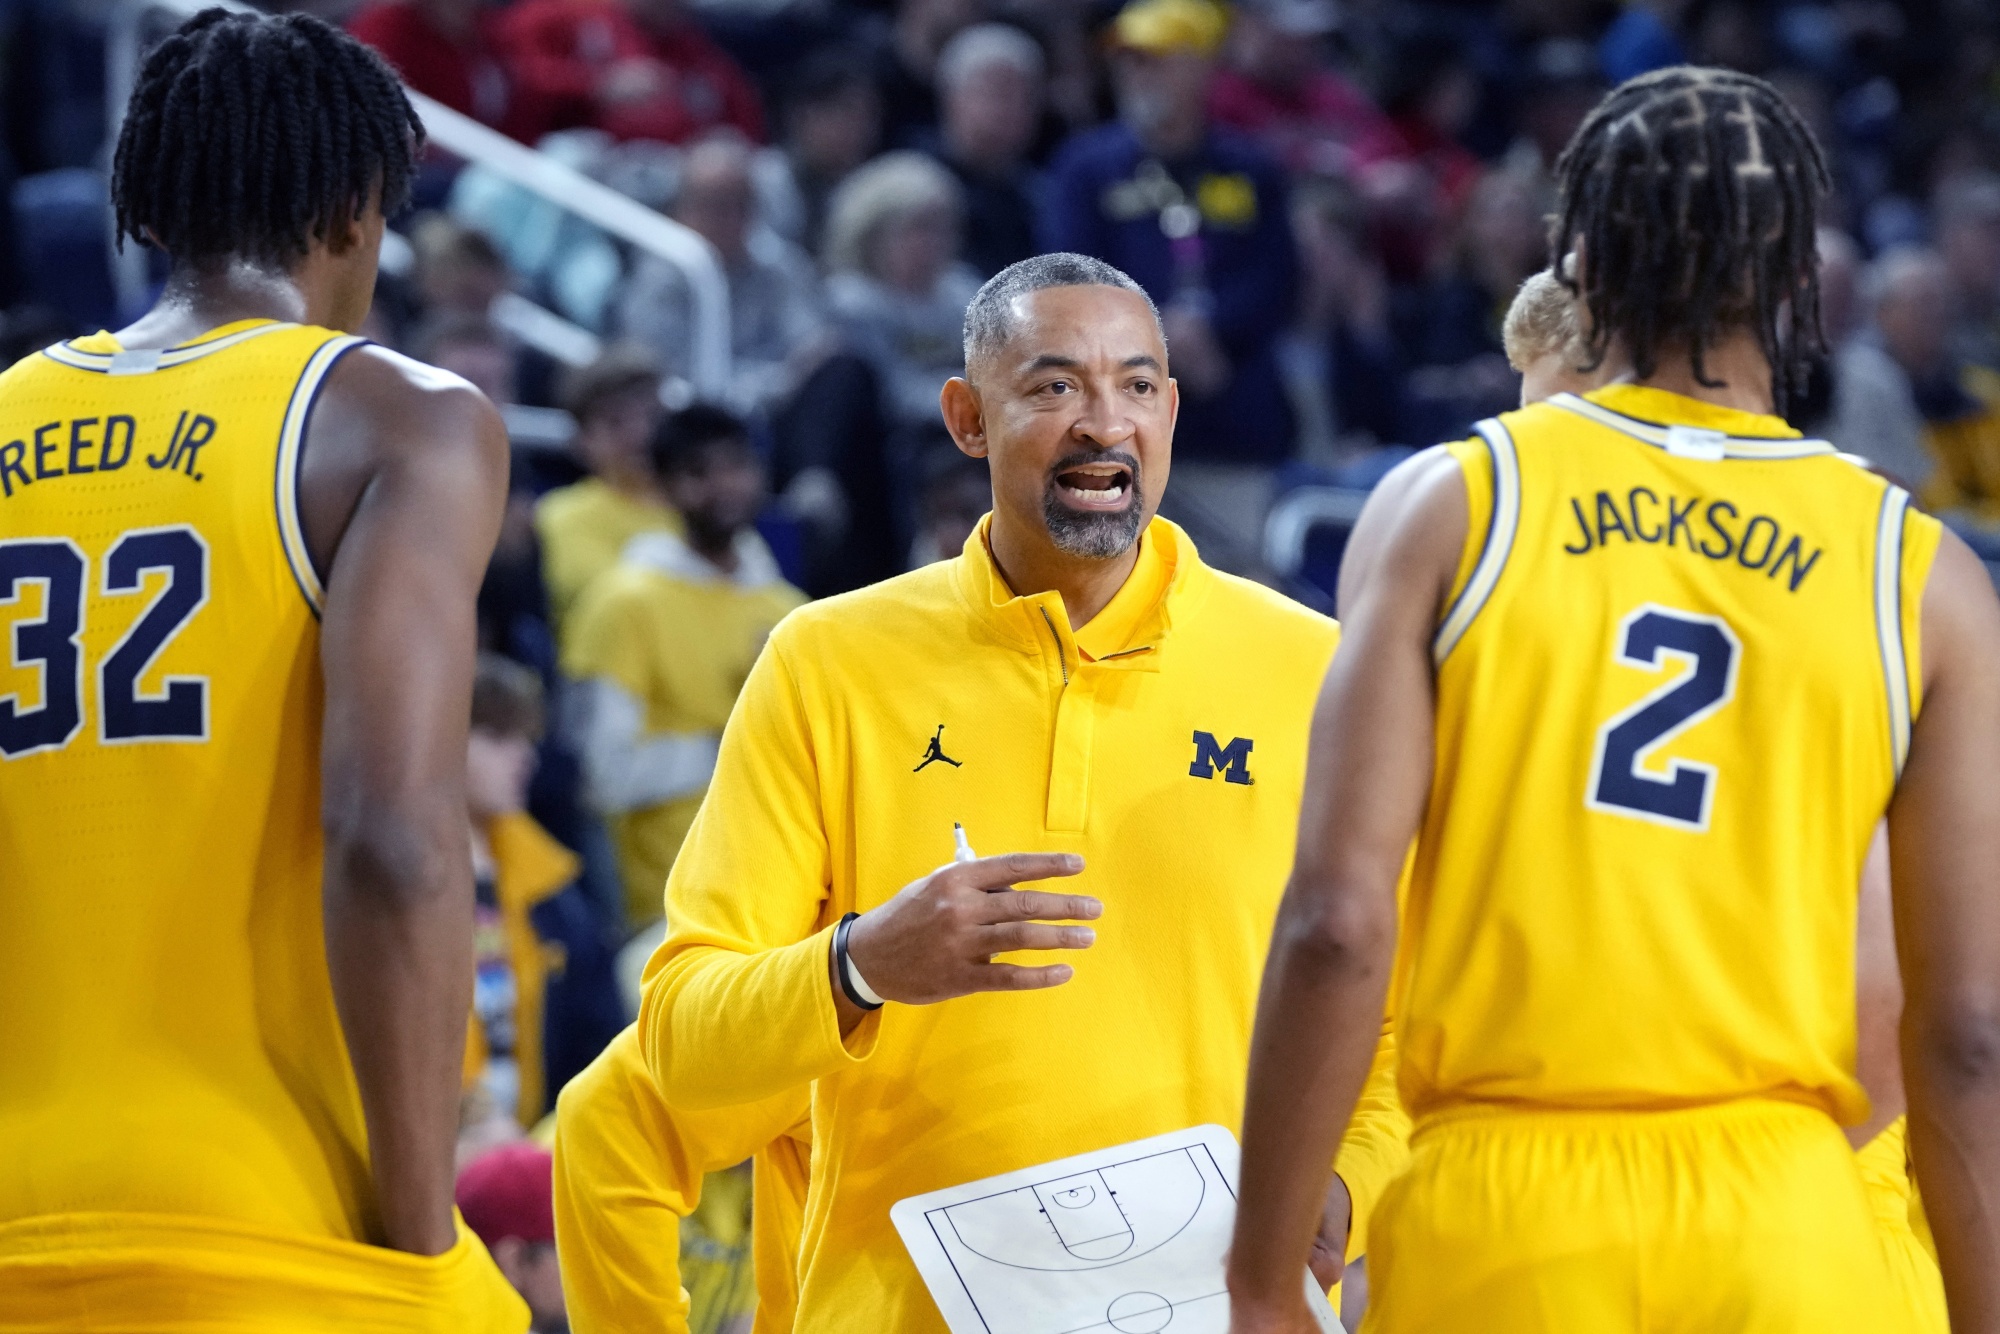 Michigan basketball's Fab Five: Then and Now